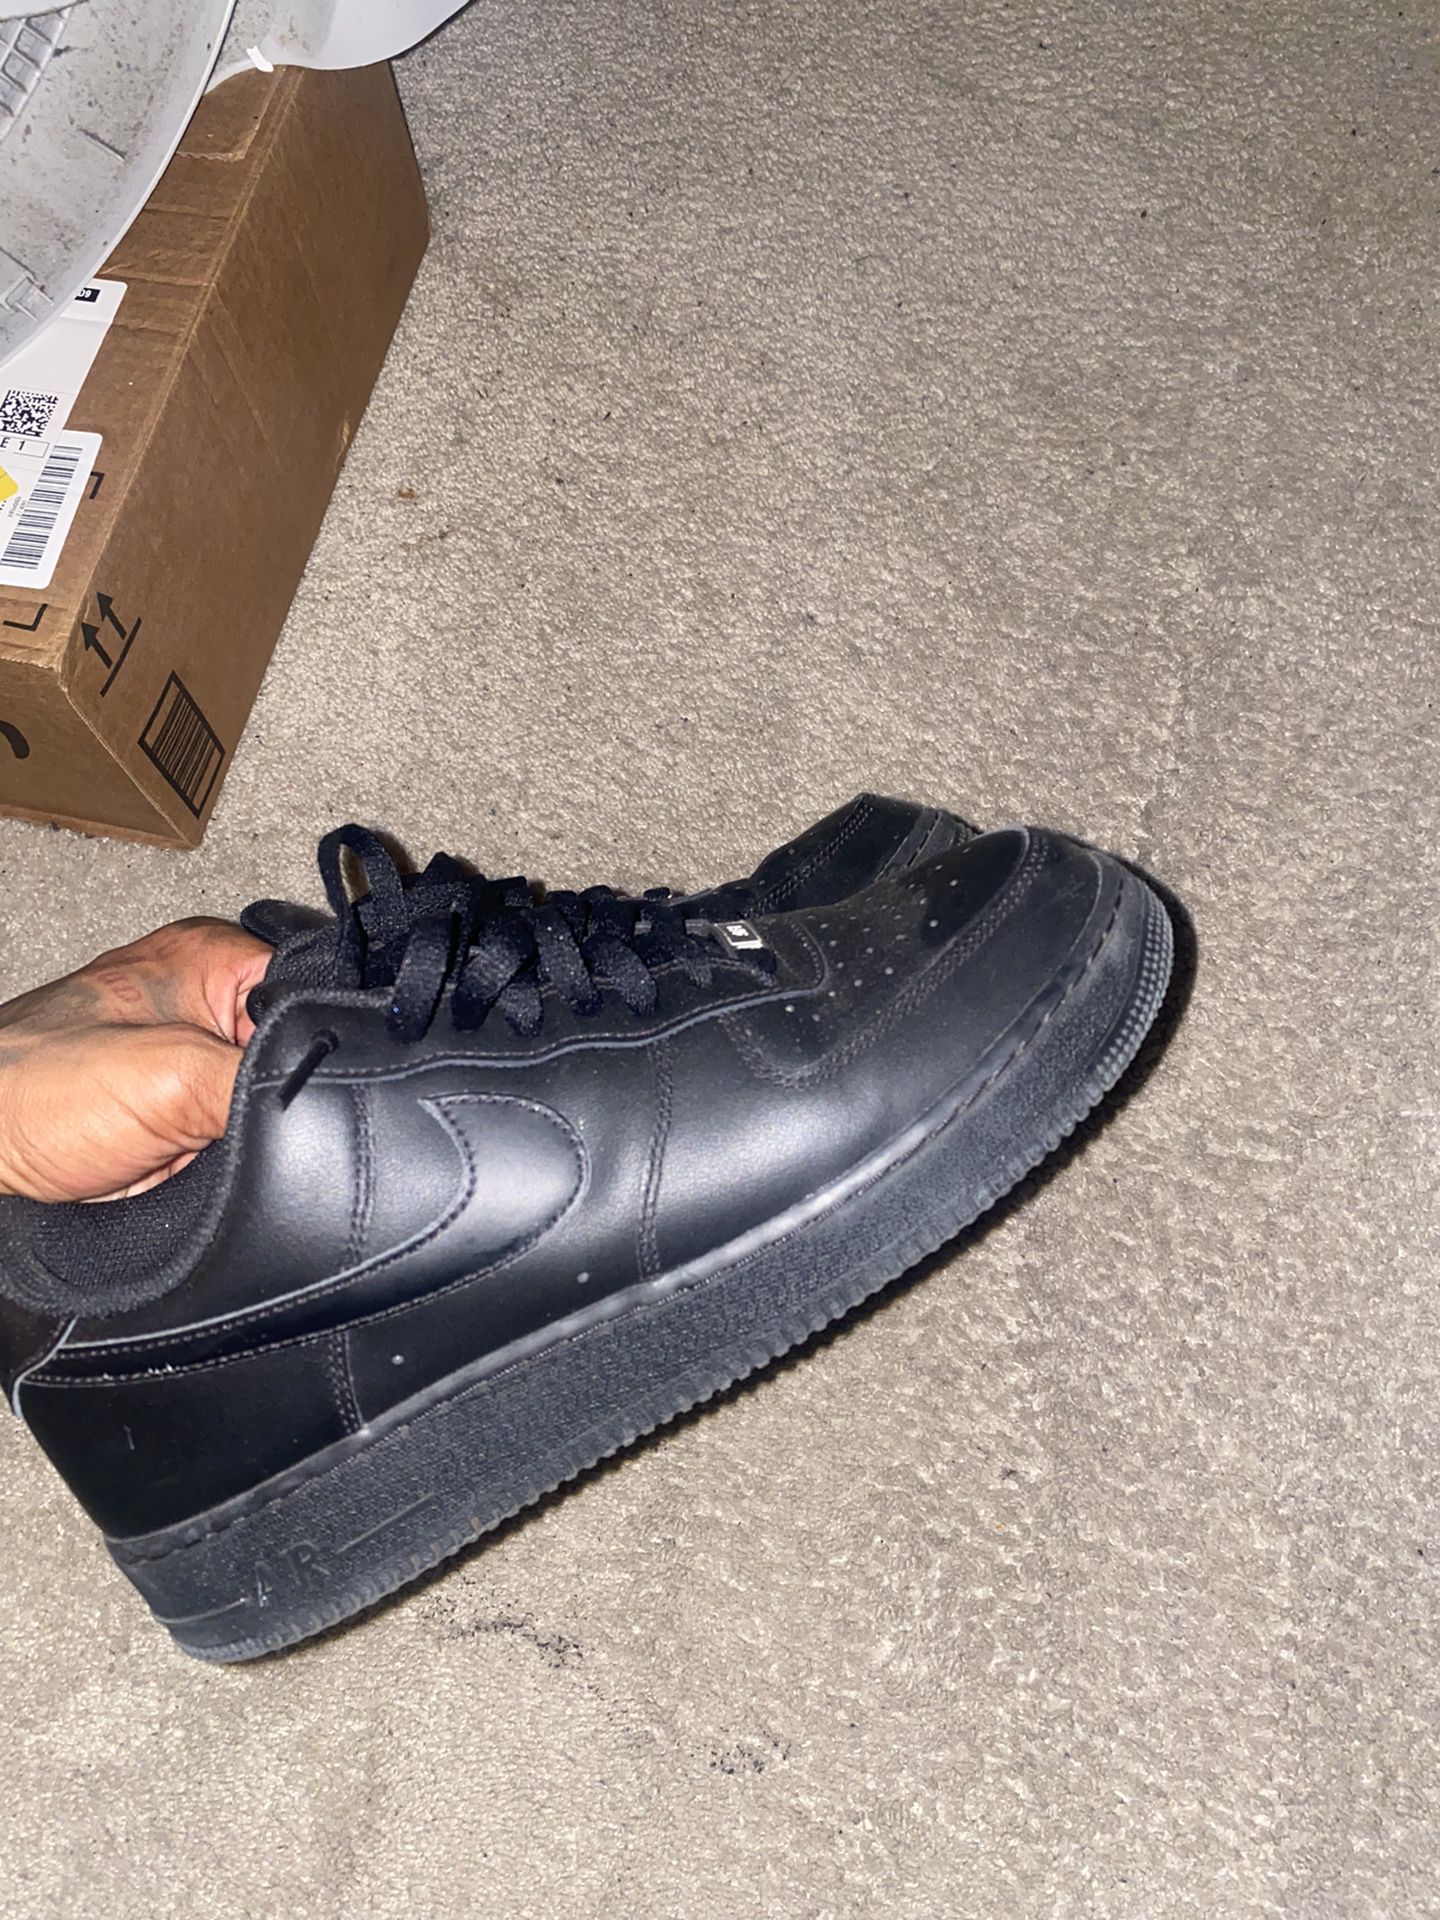 Black Air Force 1 for Sale in Mesa, AZ - OfferUp